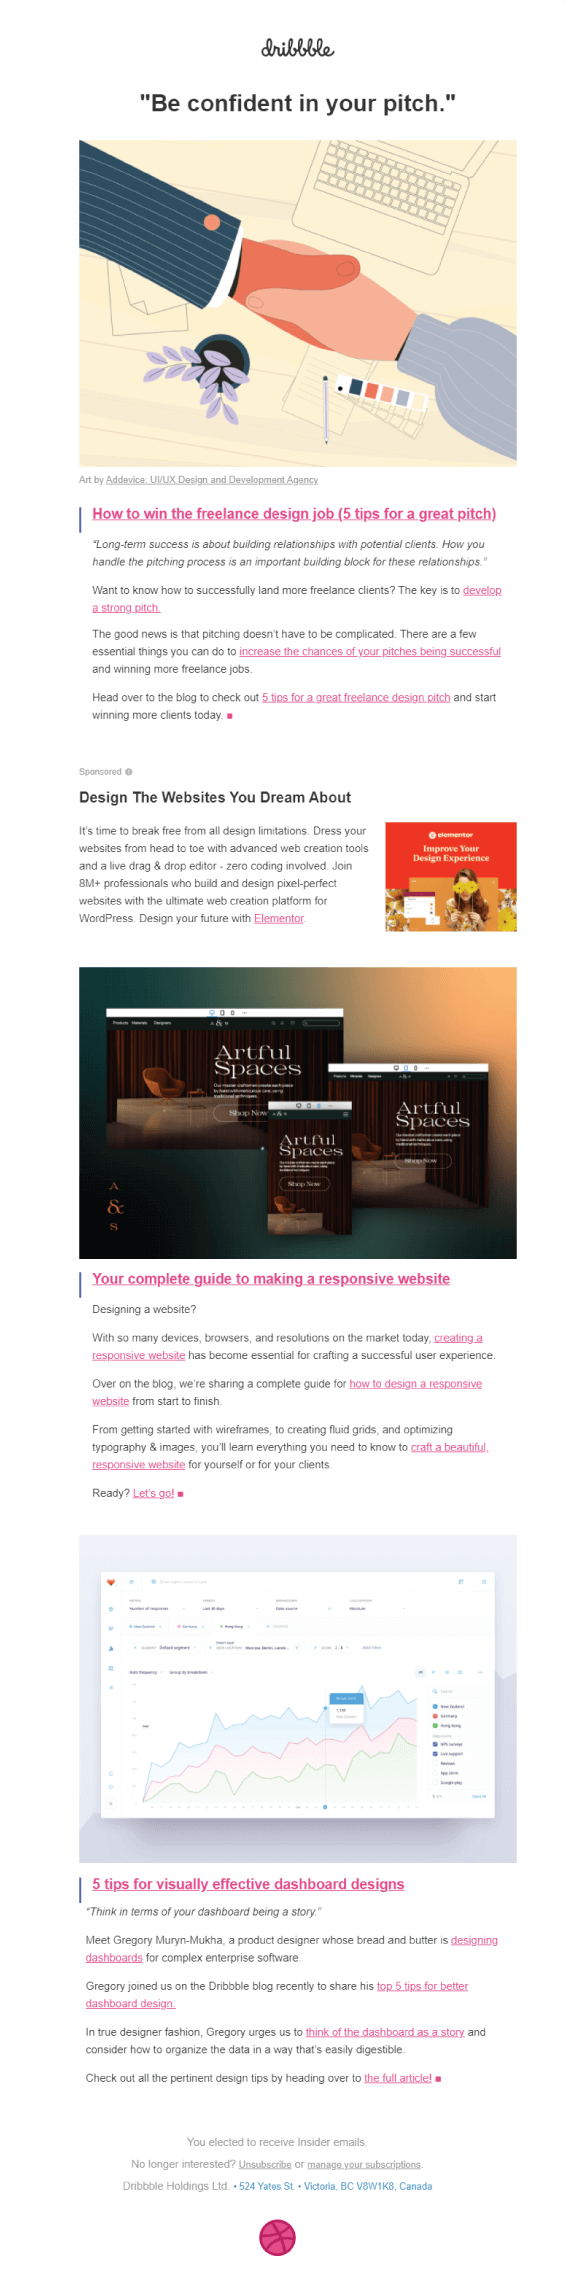 dribbble: Real-Life Email Blast Example 21